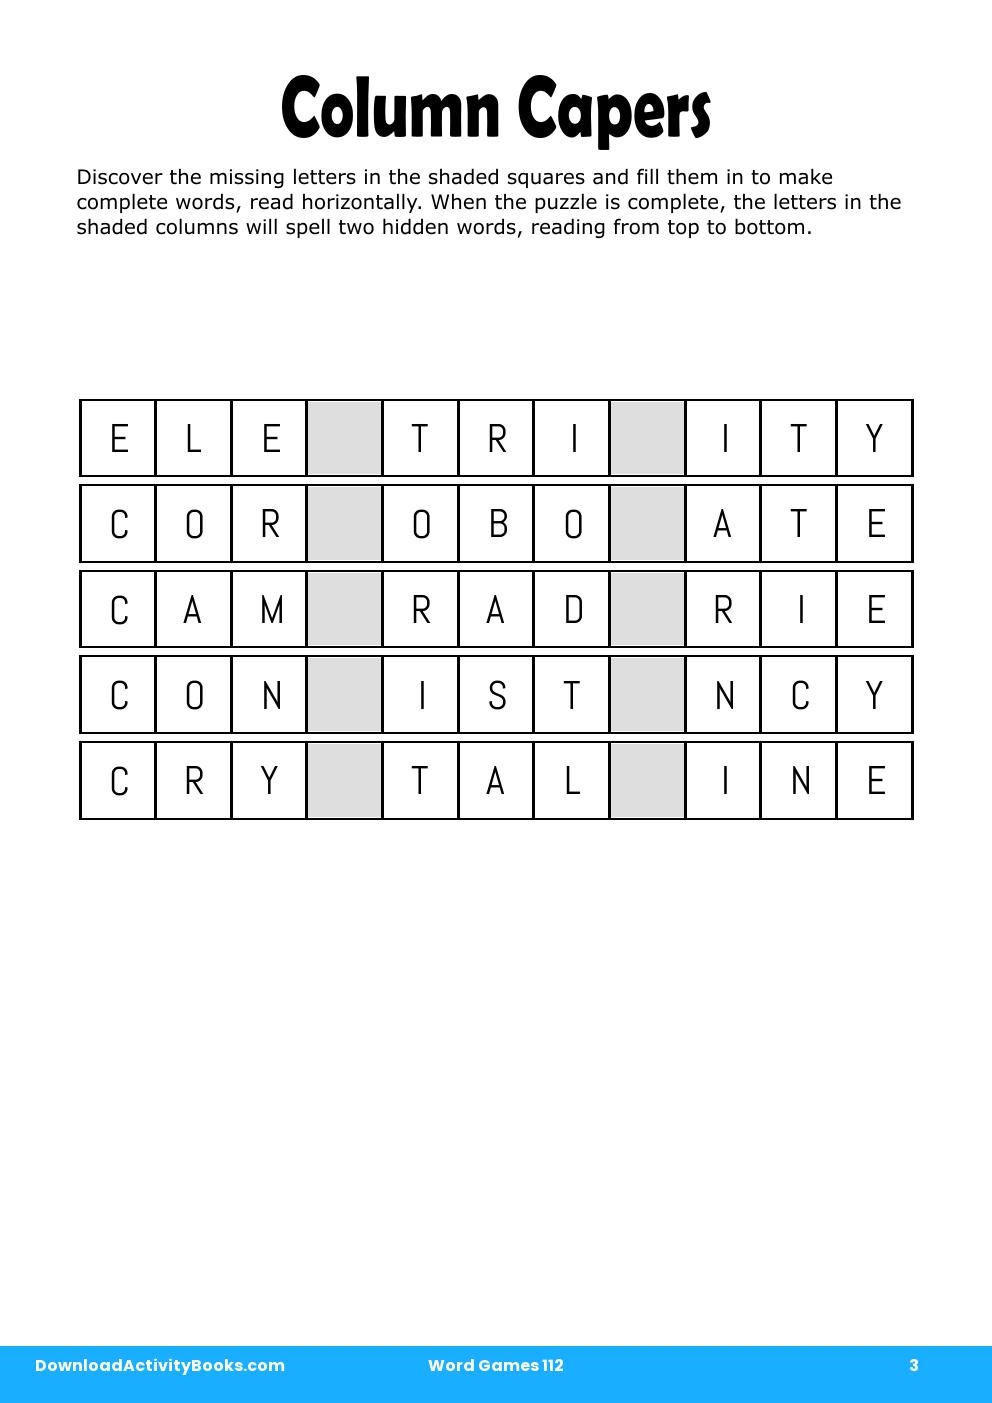 Column Capers in Word Games 112